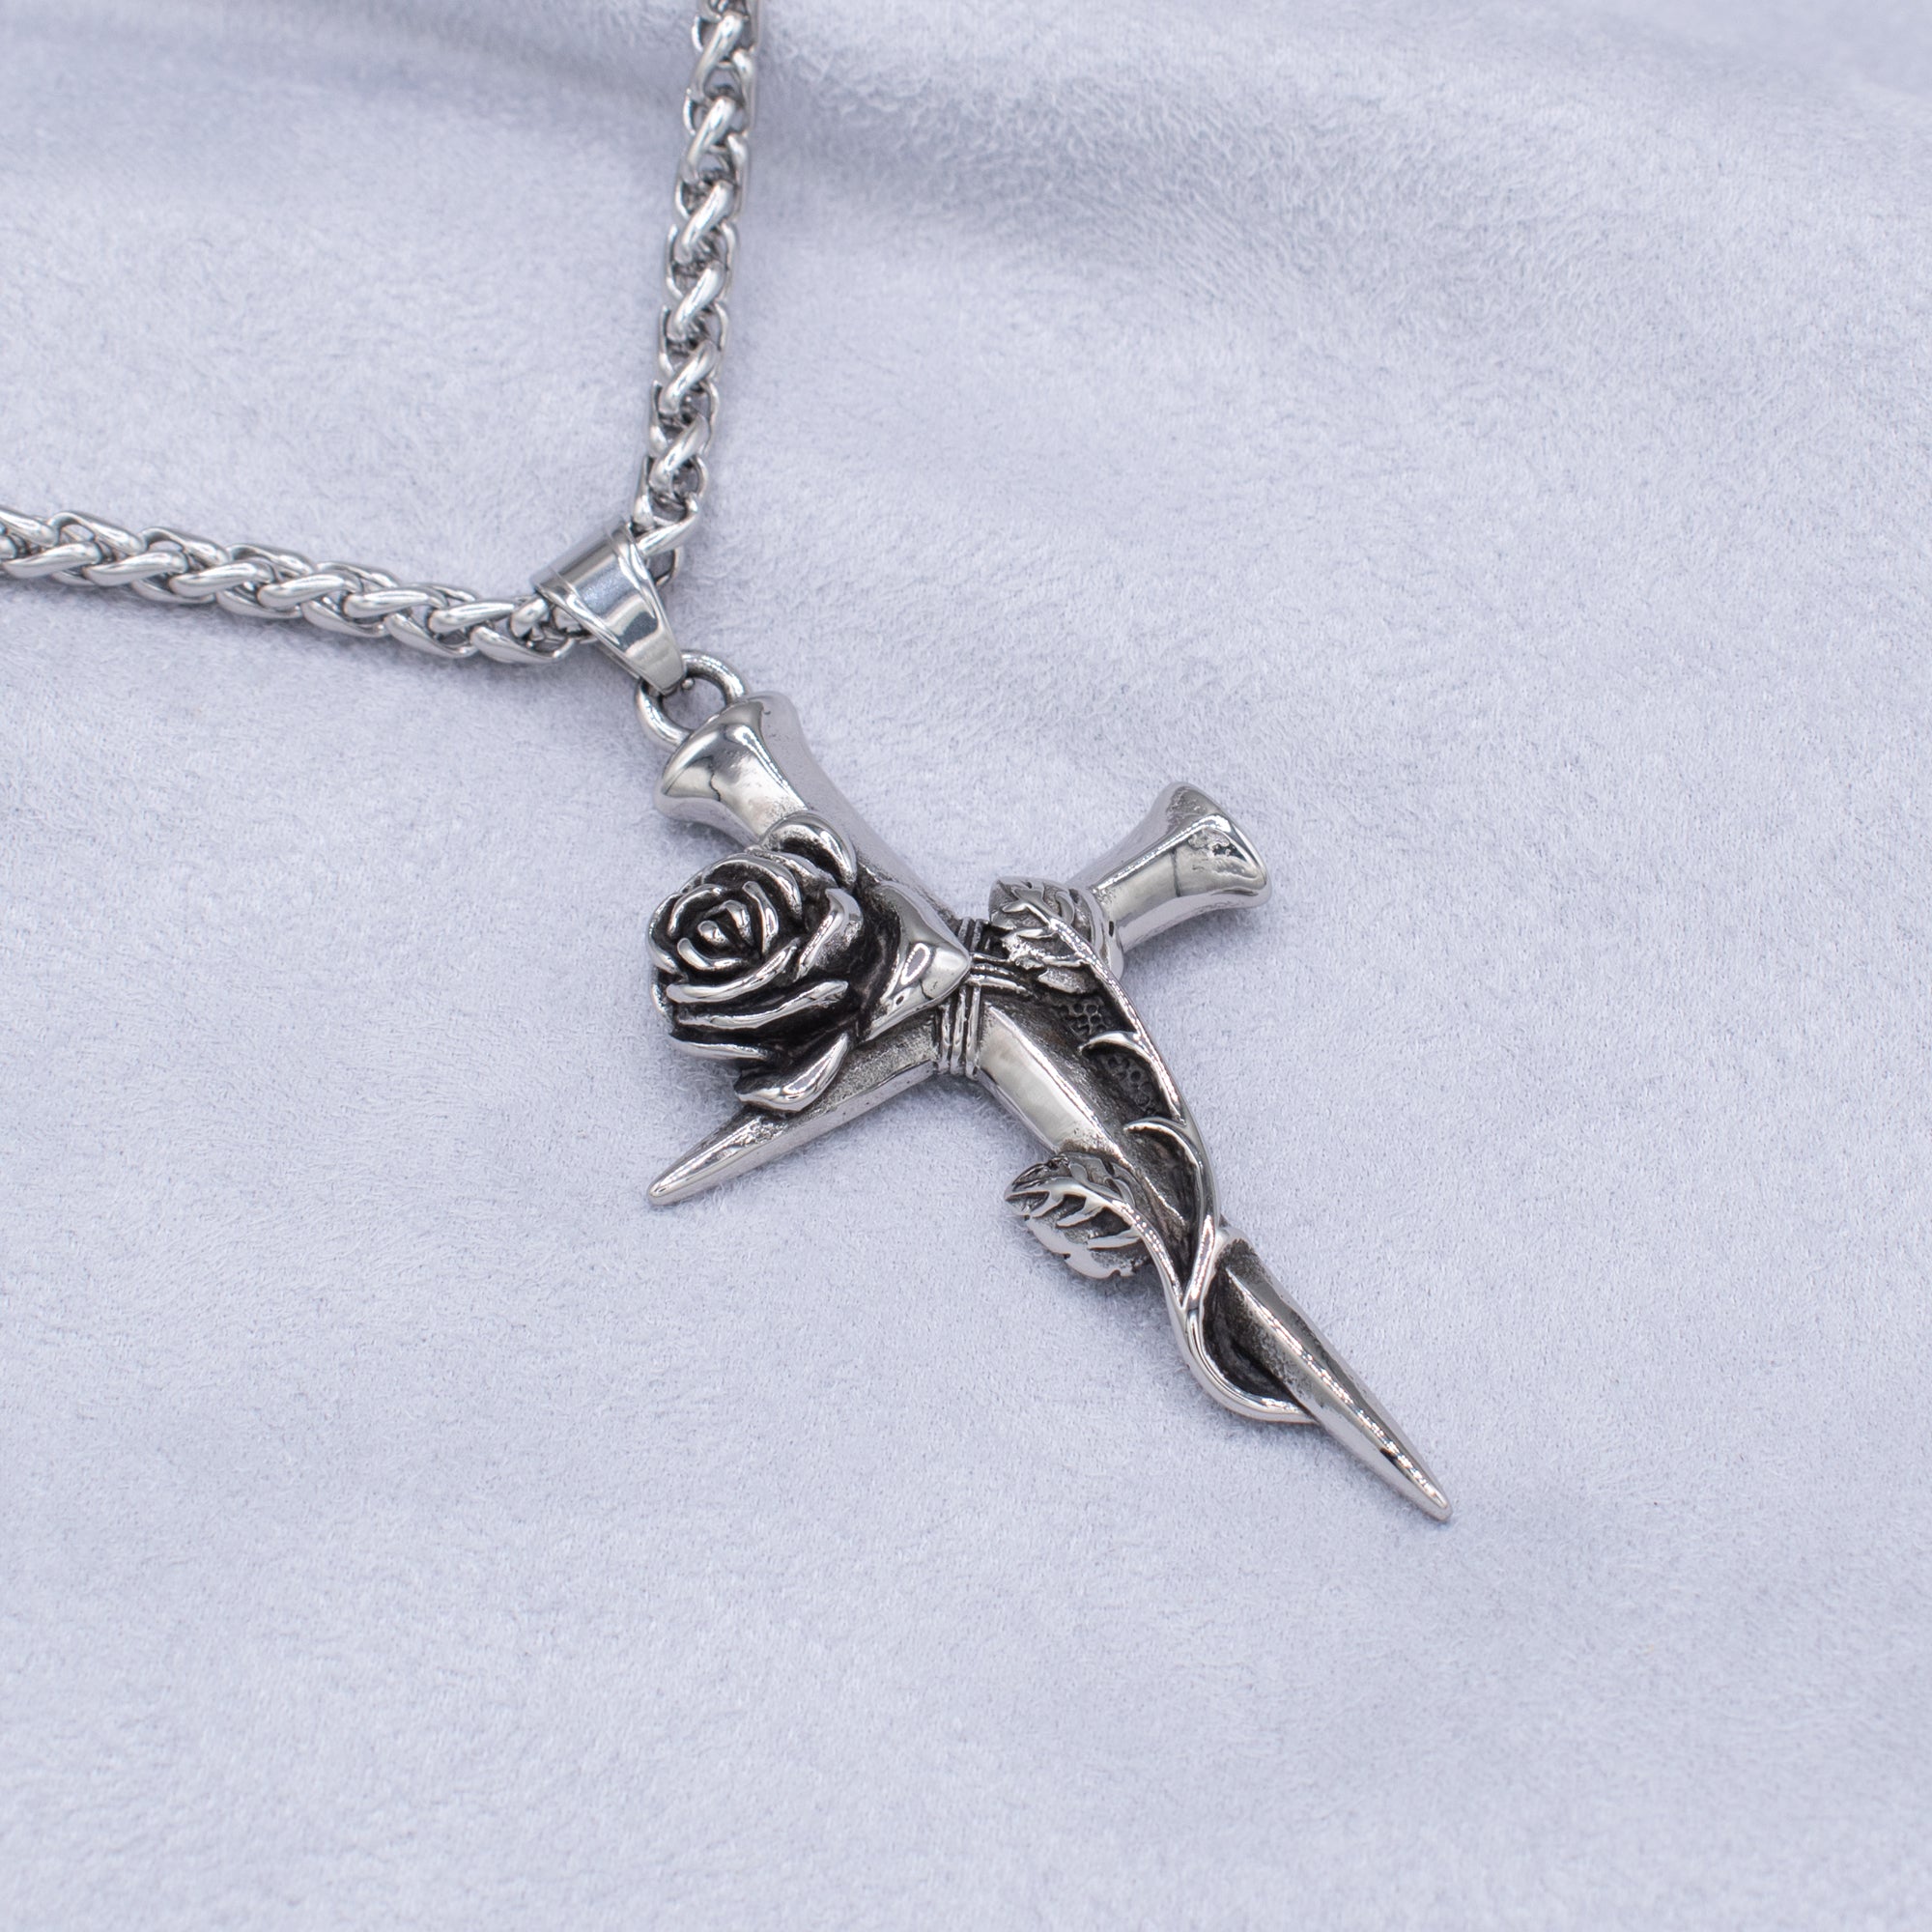 Stake & Rose Cross Pendant Necklace (Silver)